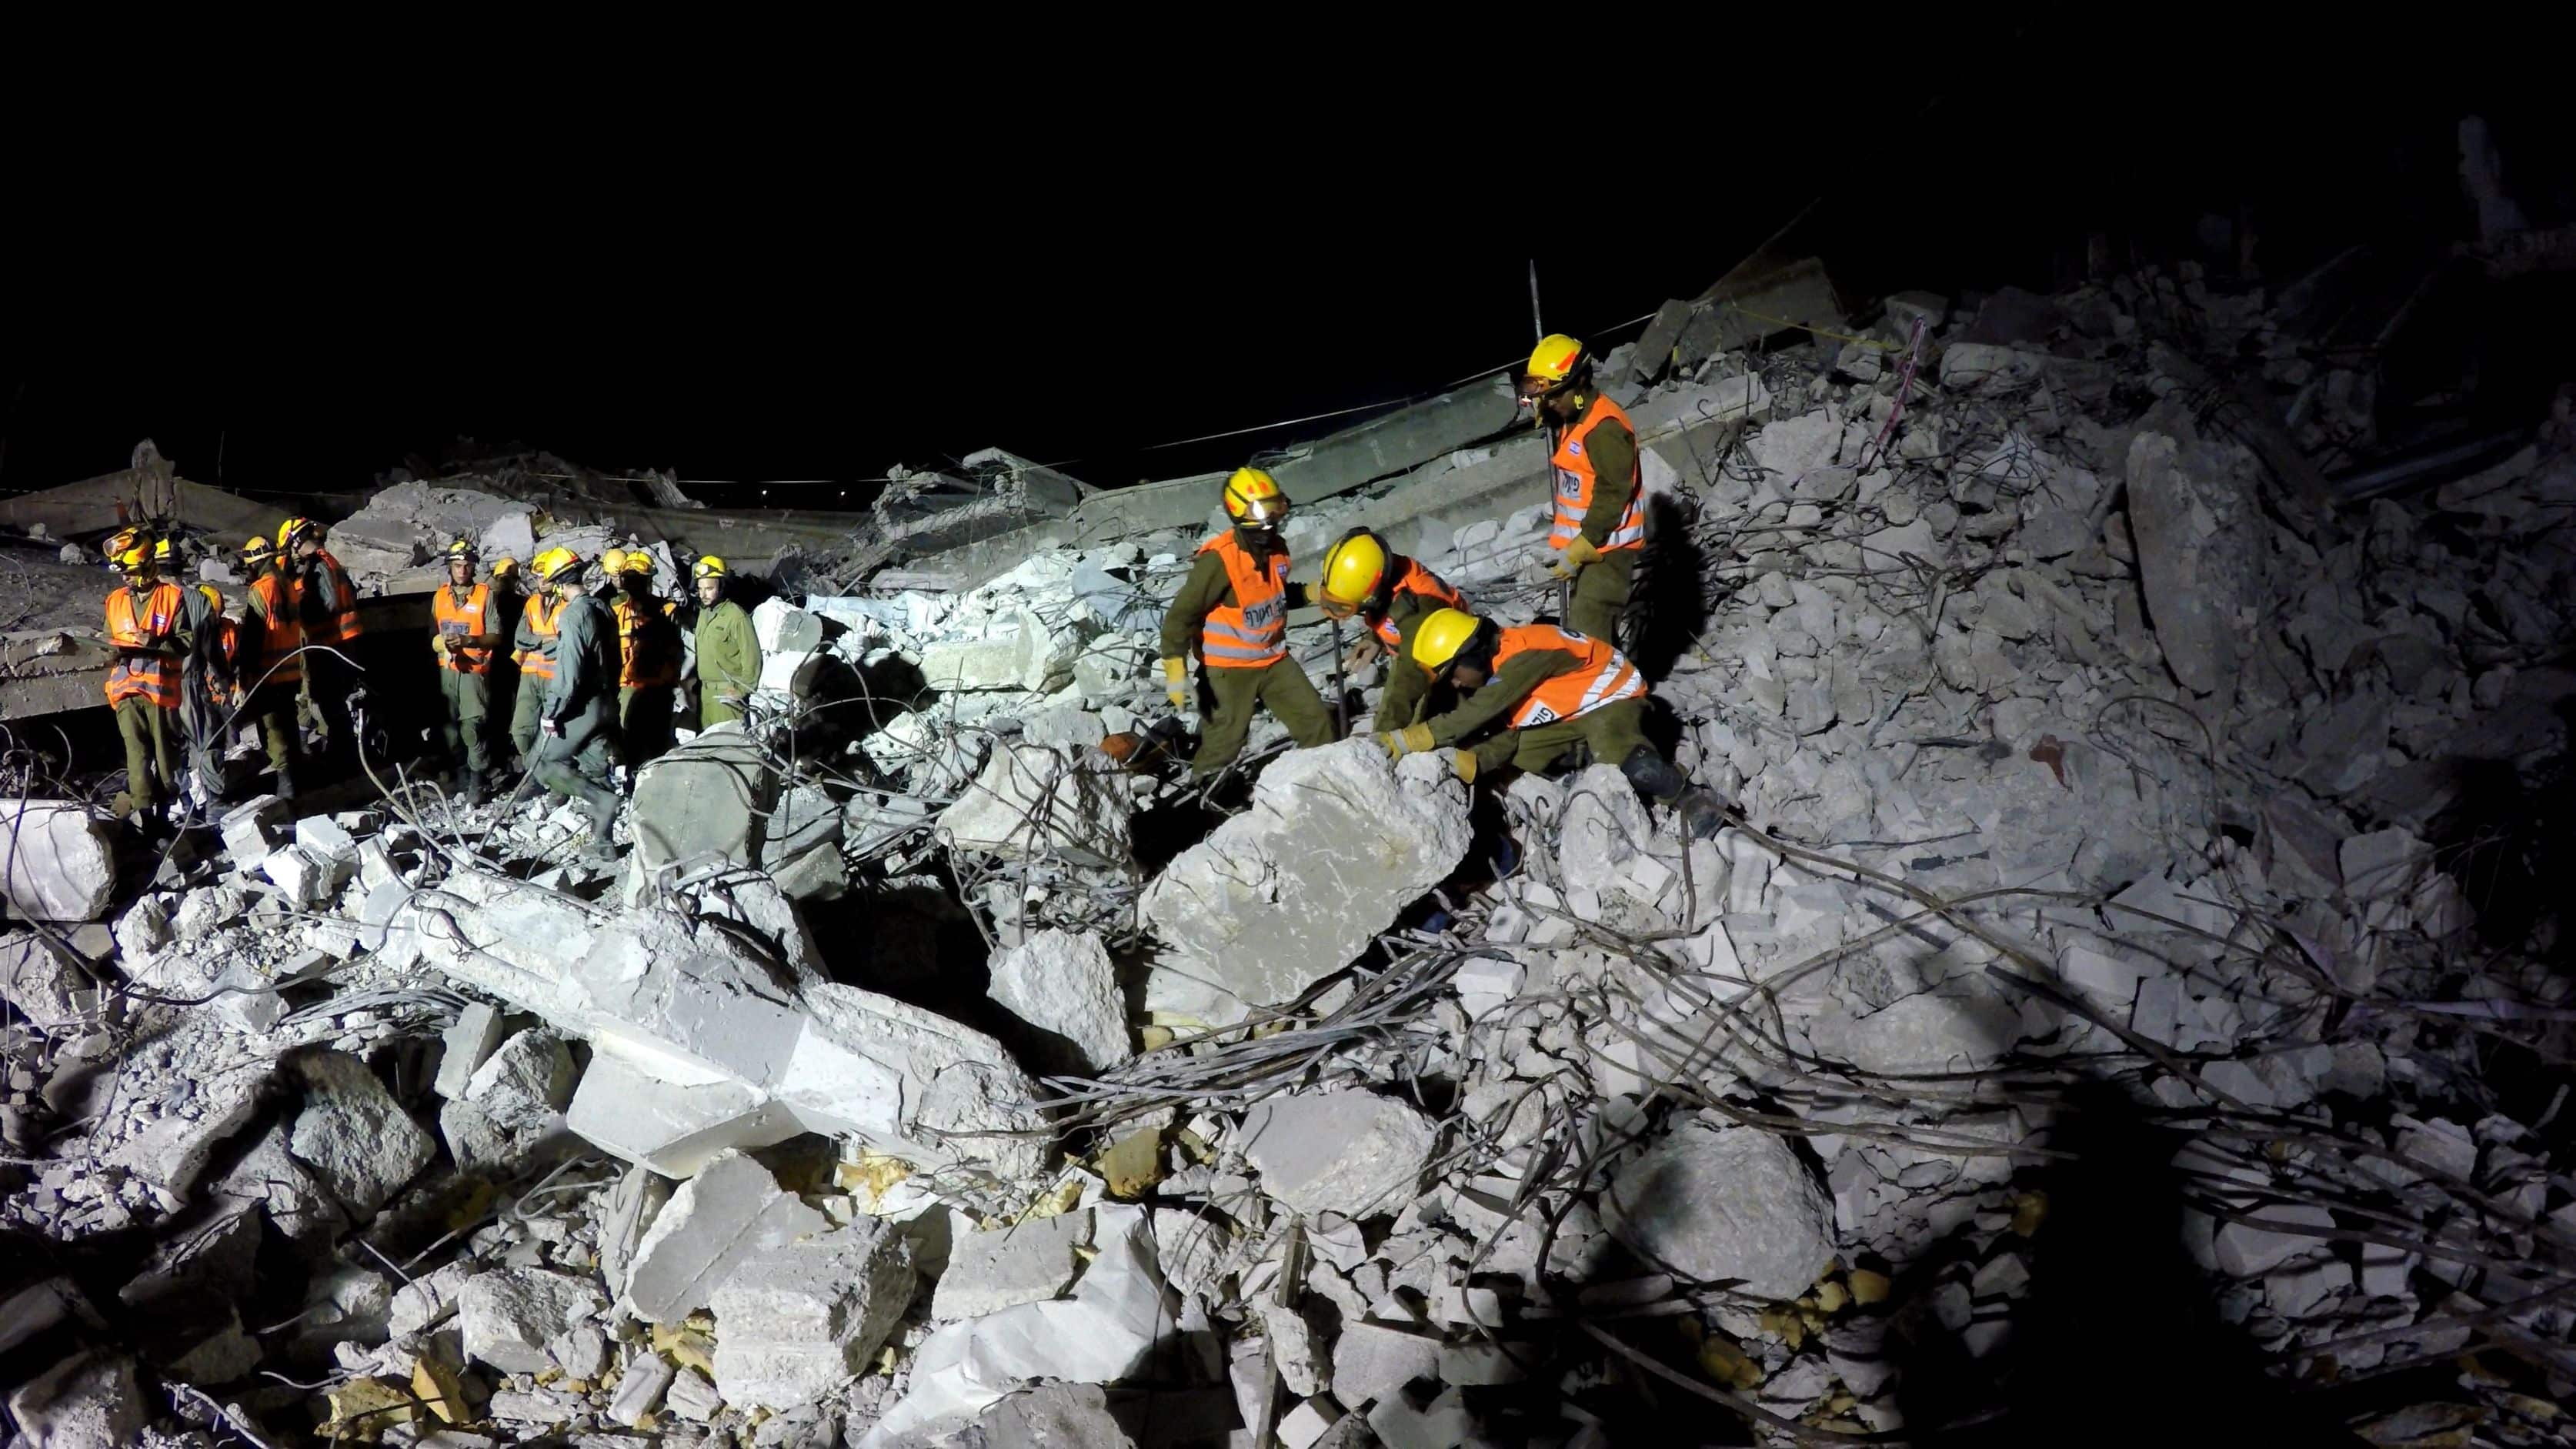 HOLON, ISRAEL JULY 27th, 2015: Homeland Security Soldiers search for earthquake rocket attack tsunami injured people digging through the rubble during night drill